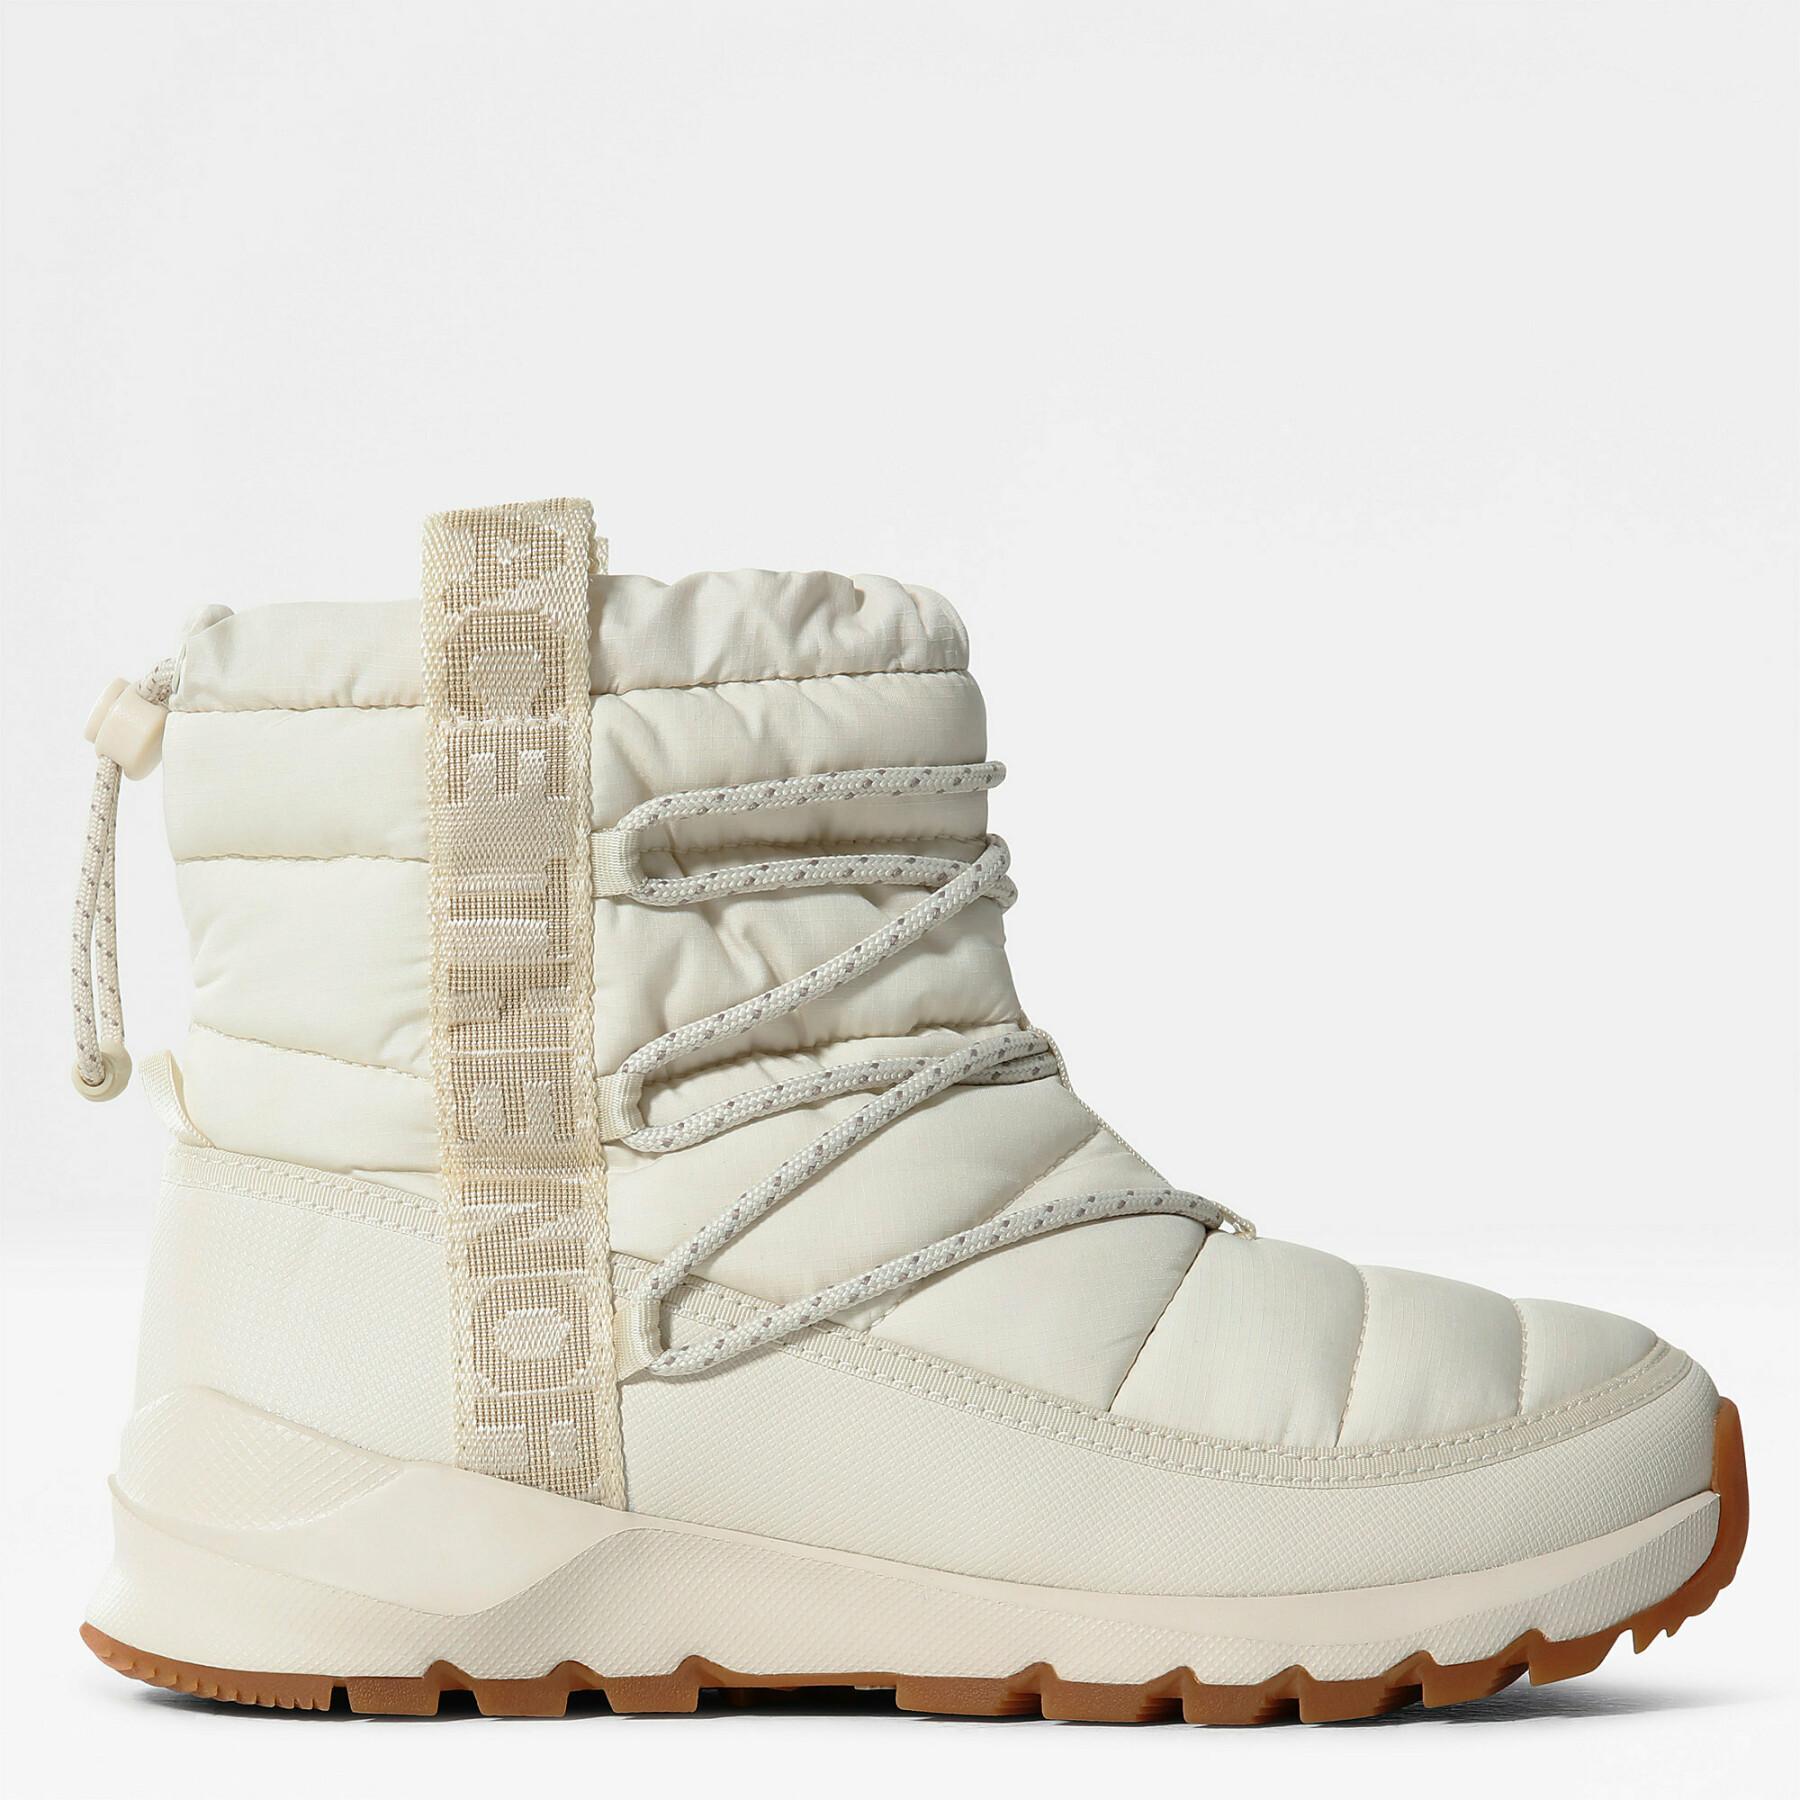 Botas de mulher The North Face Thermoball